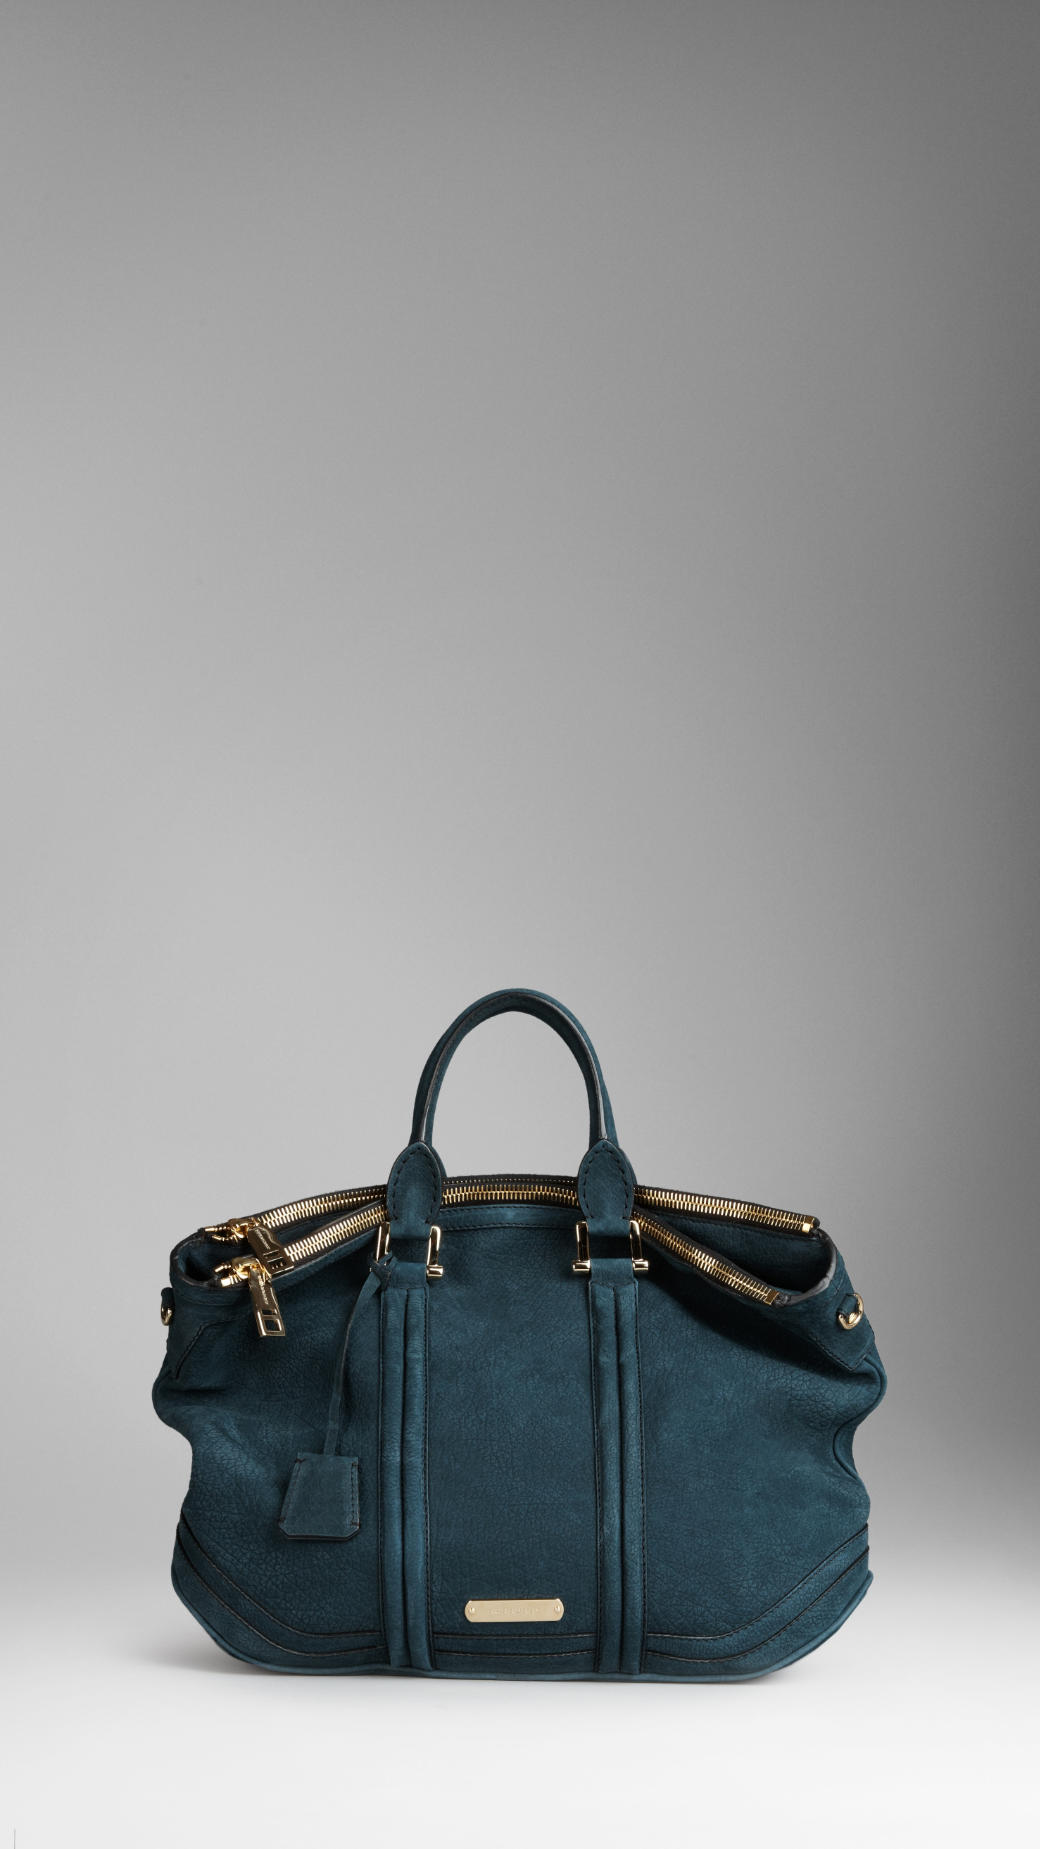 Burberry Large Luggage Suede Tote Bag in Blue (indigo green) | Lyst